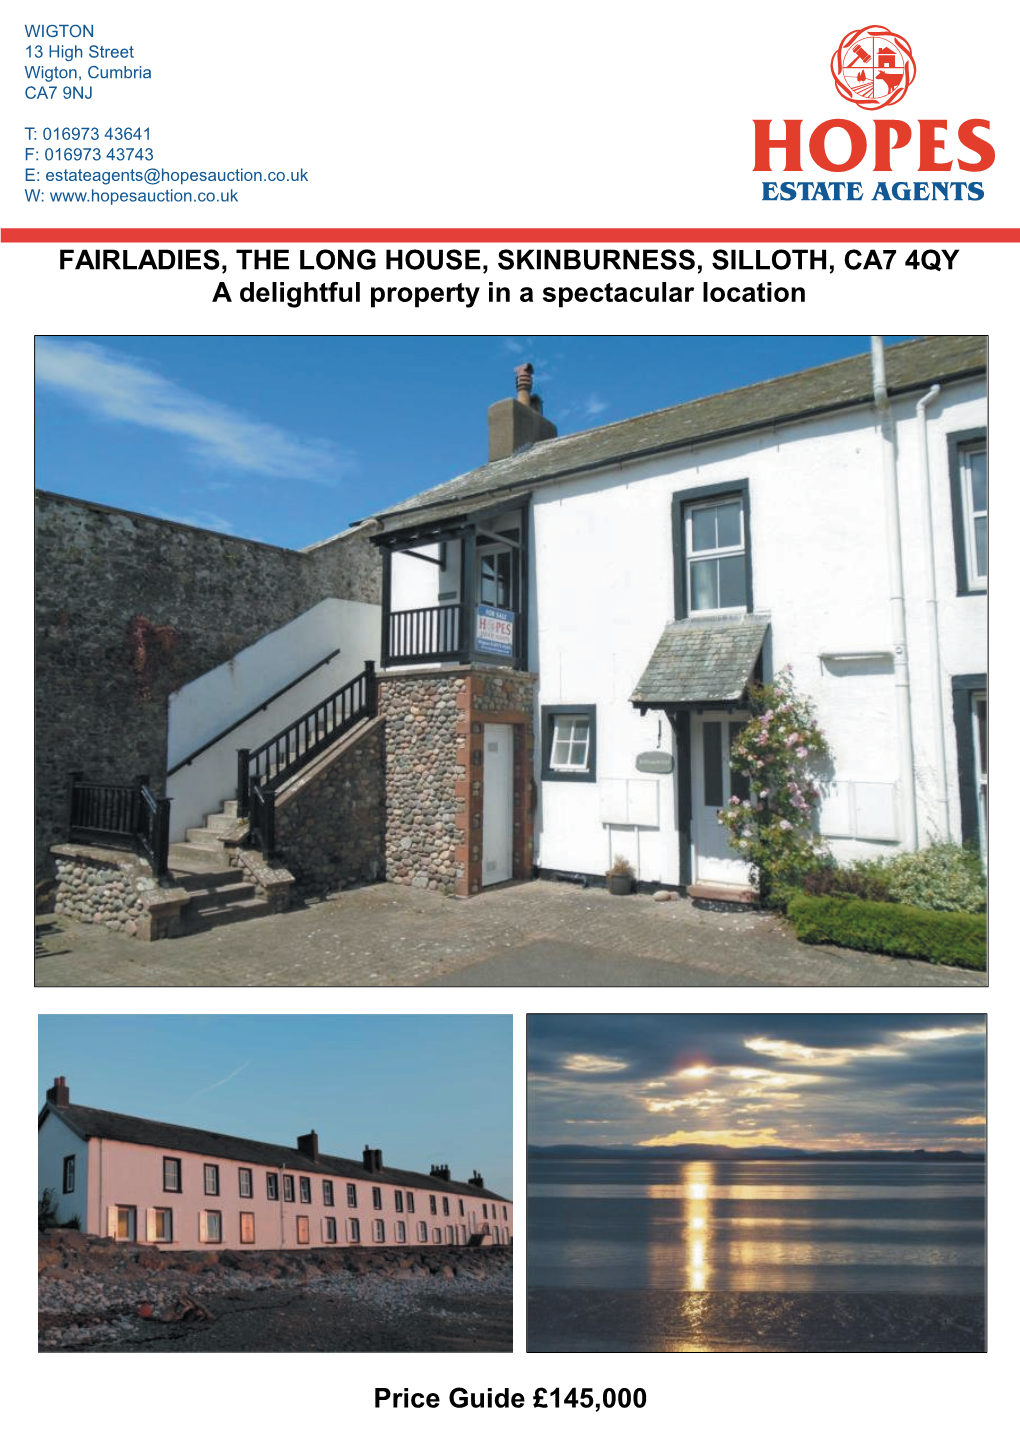 FAIRLADIES, the LONG HOUSE, SKINBURNESS, SILLOTH, CA7 4QY a Delightful Property in a Spectacular Location